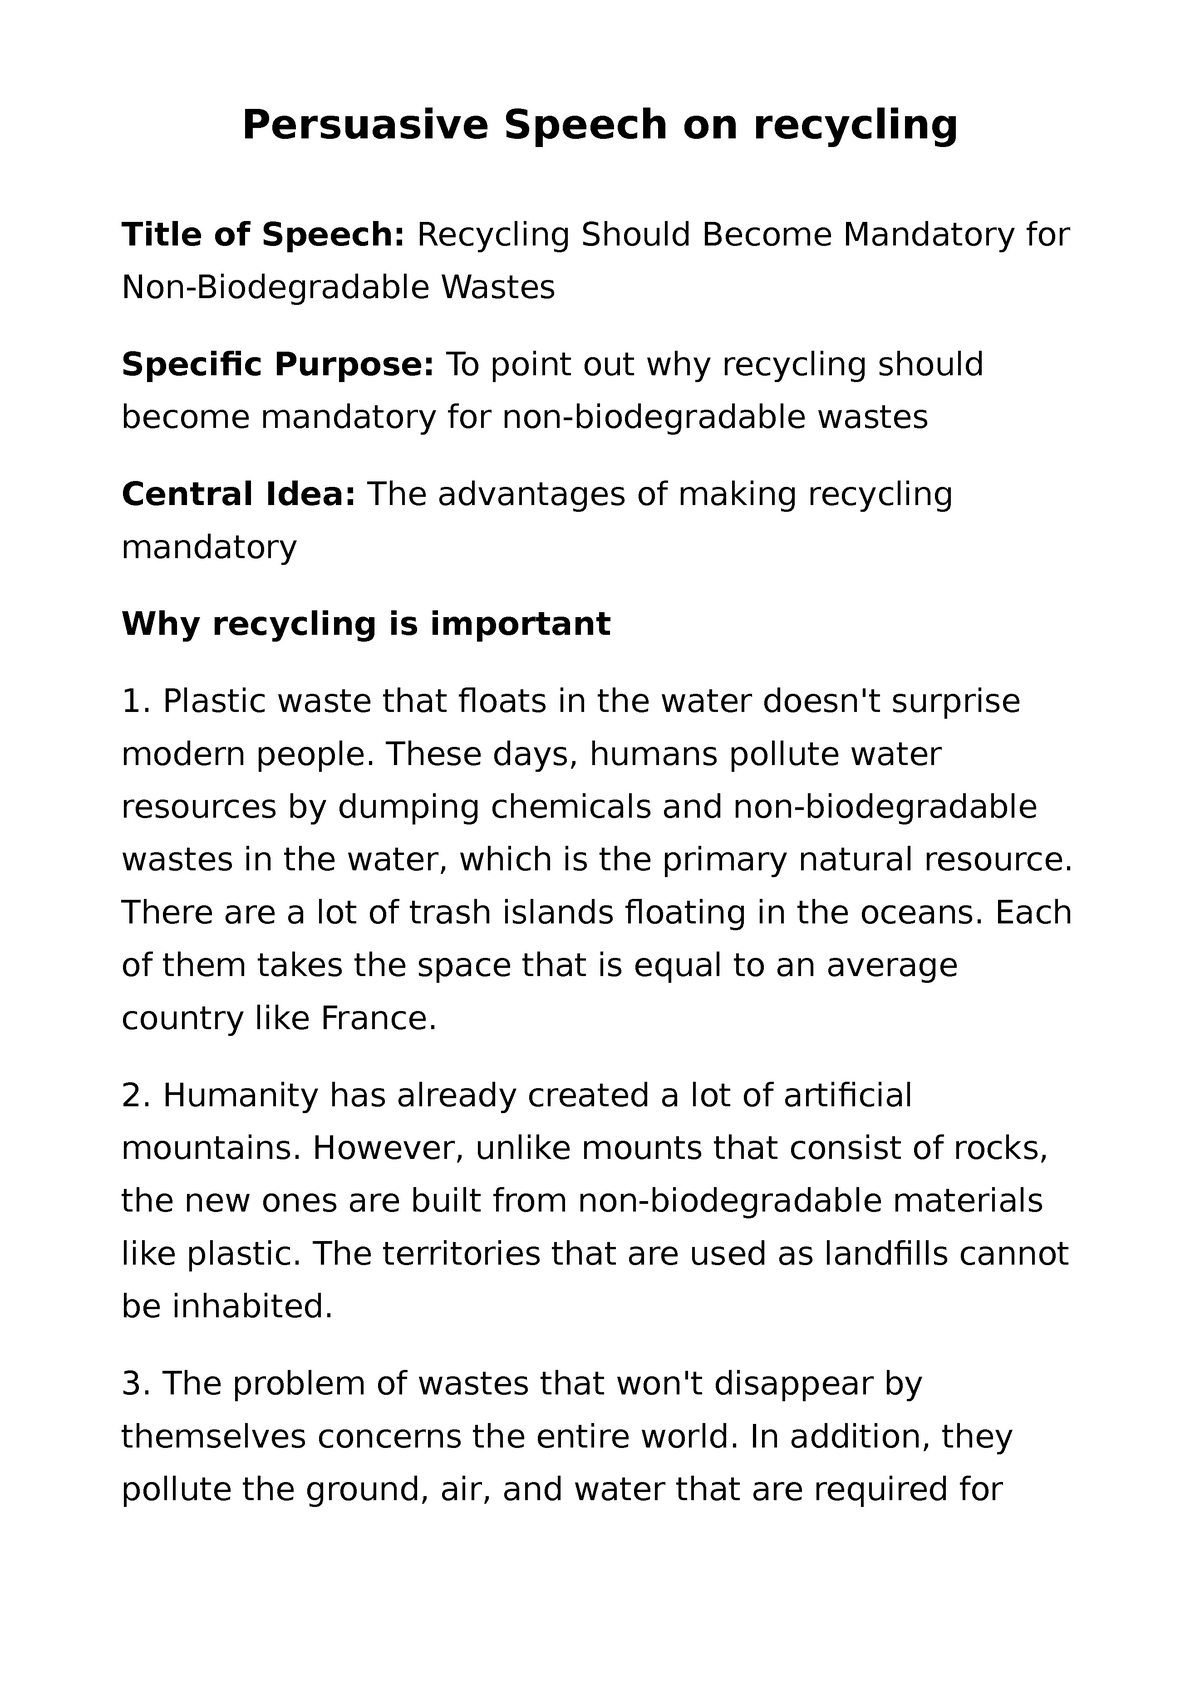 persuasive speech about recycling should be mandatory